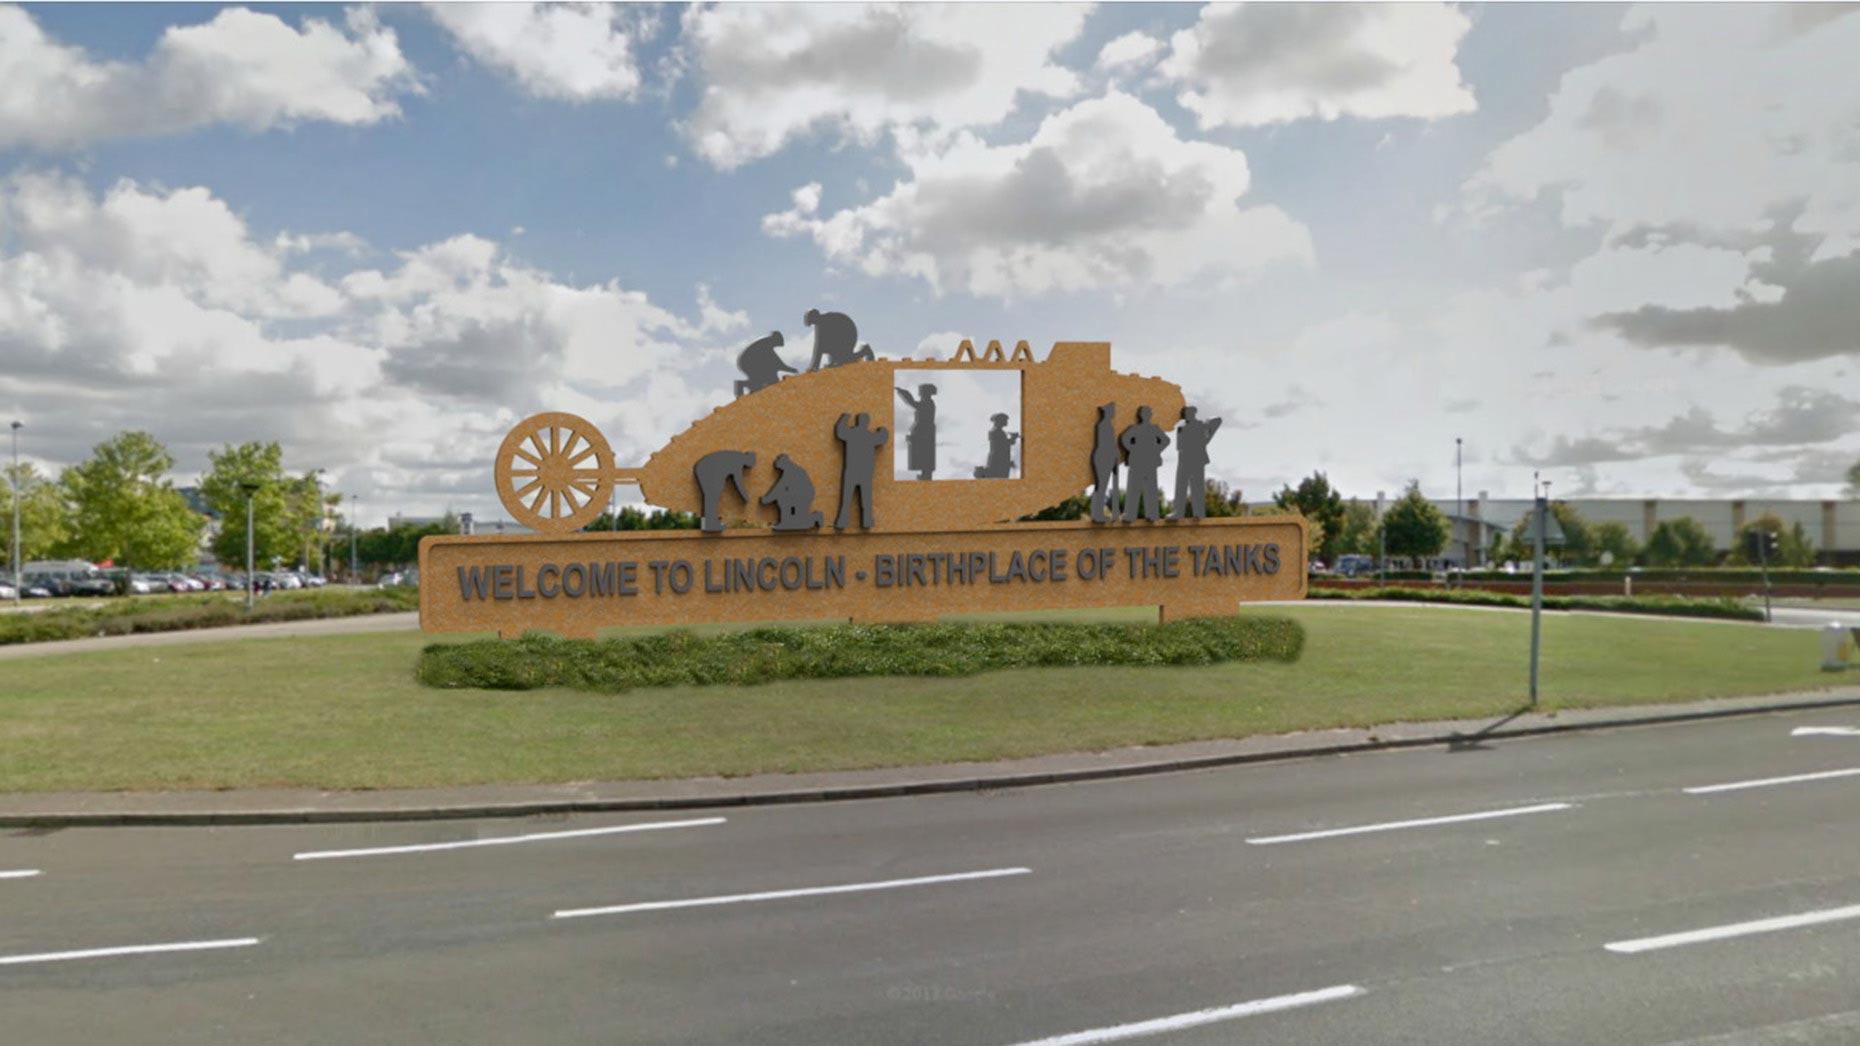 An almost finalised design. Position on the roundabout may vary slightly. Photo: Lincoln Tank Memorial Group